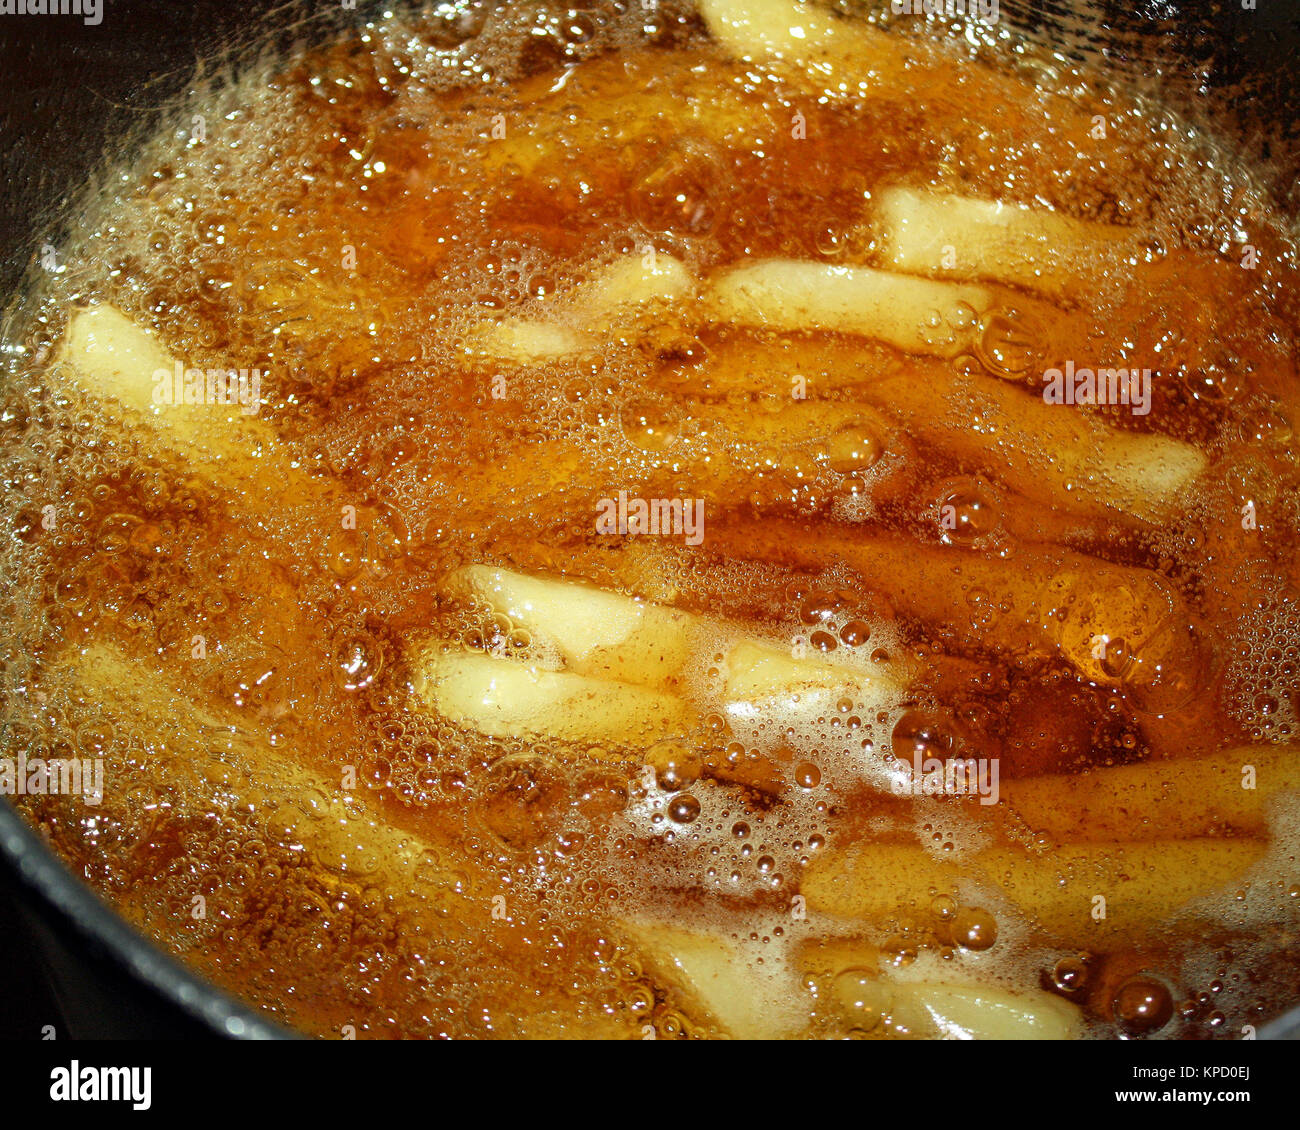 French fries cooking in oil filled deep fryer Stock Photo